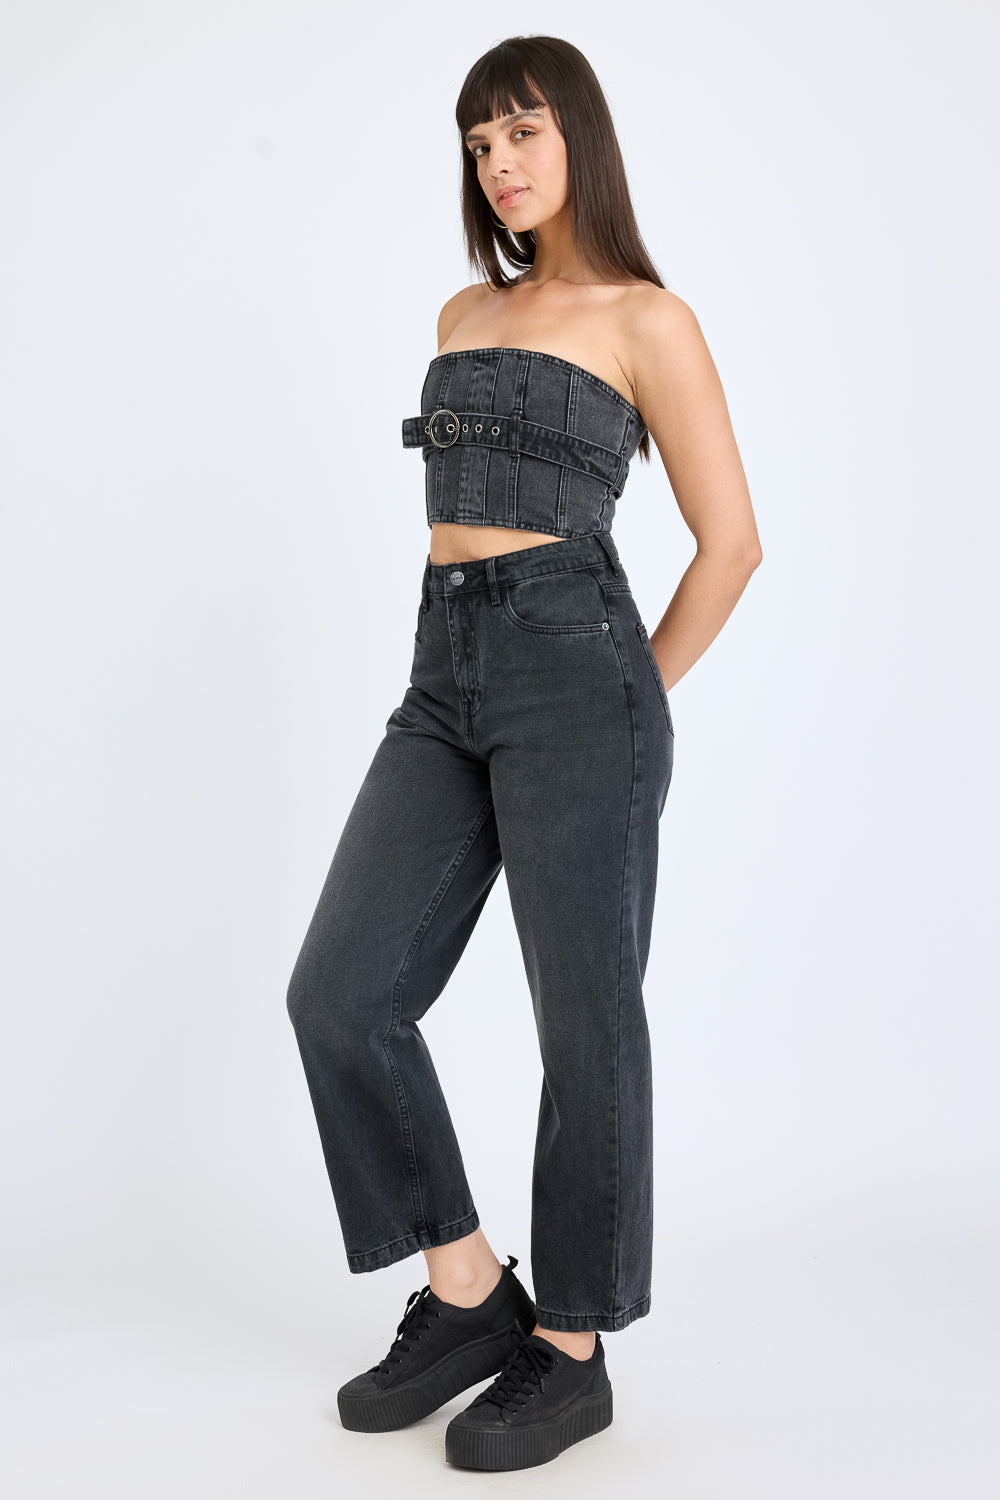 CHARCOAL BELTED TUBE TOP